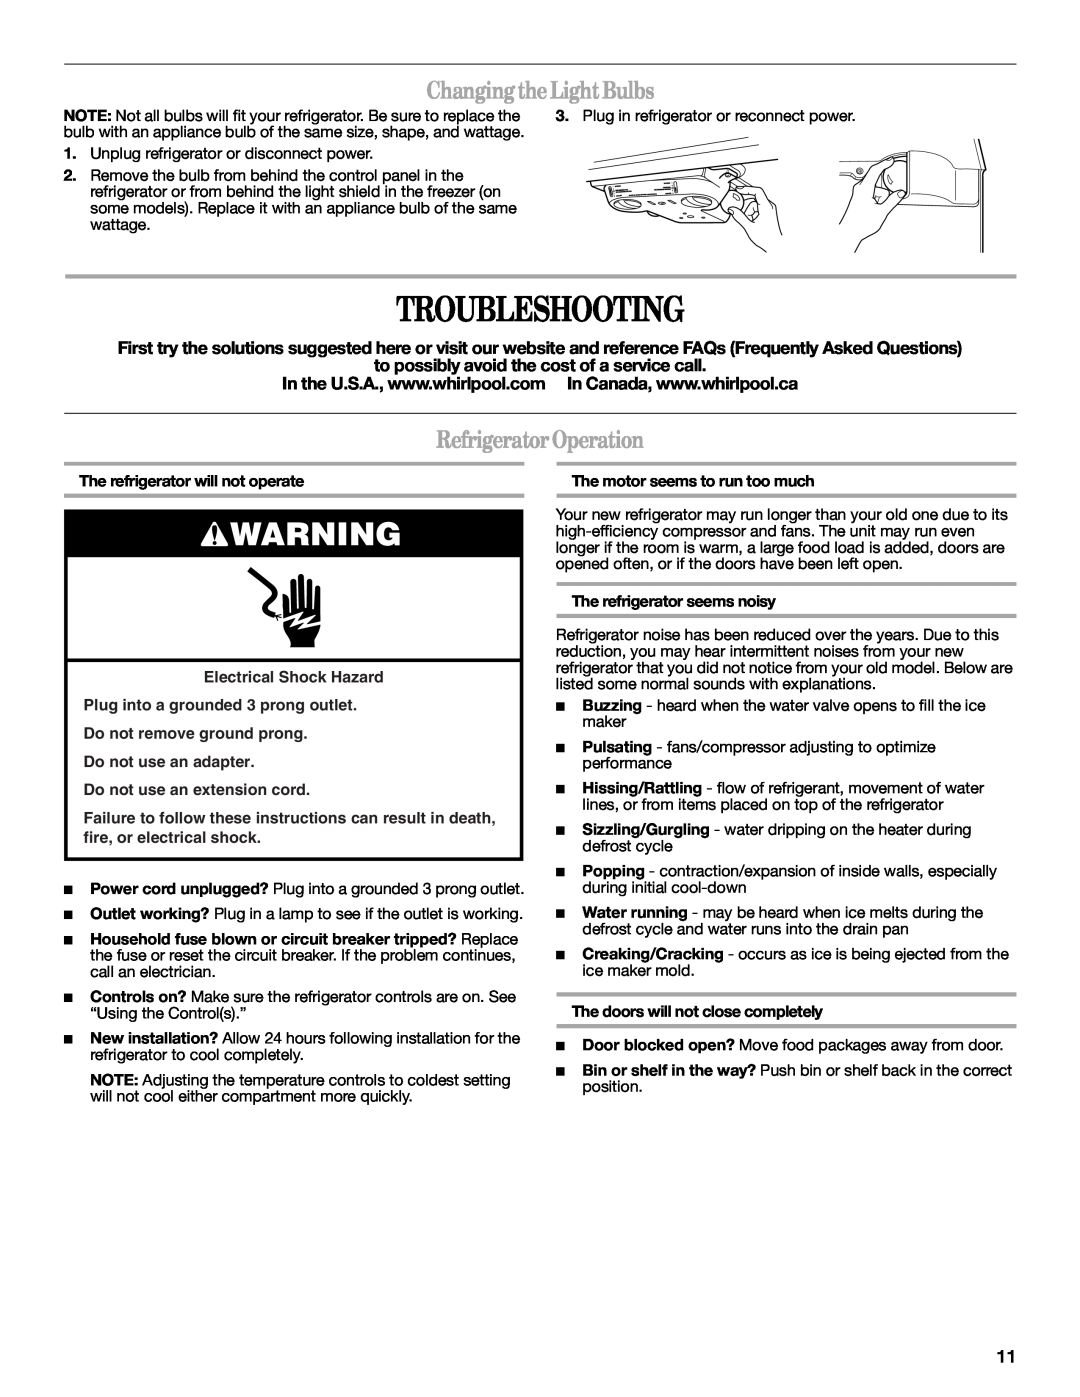 Whirlpool W10249205A, W10249204A installation instructions Troubleshooting, Changing the Light Bulbs, Refrigerator Operation 